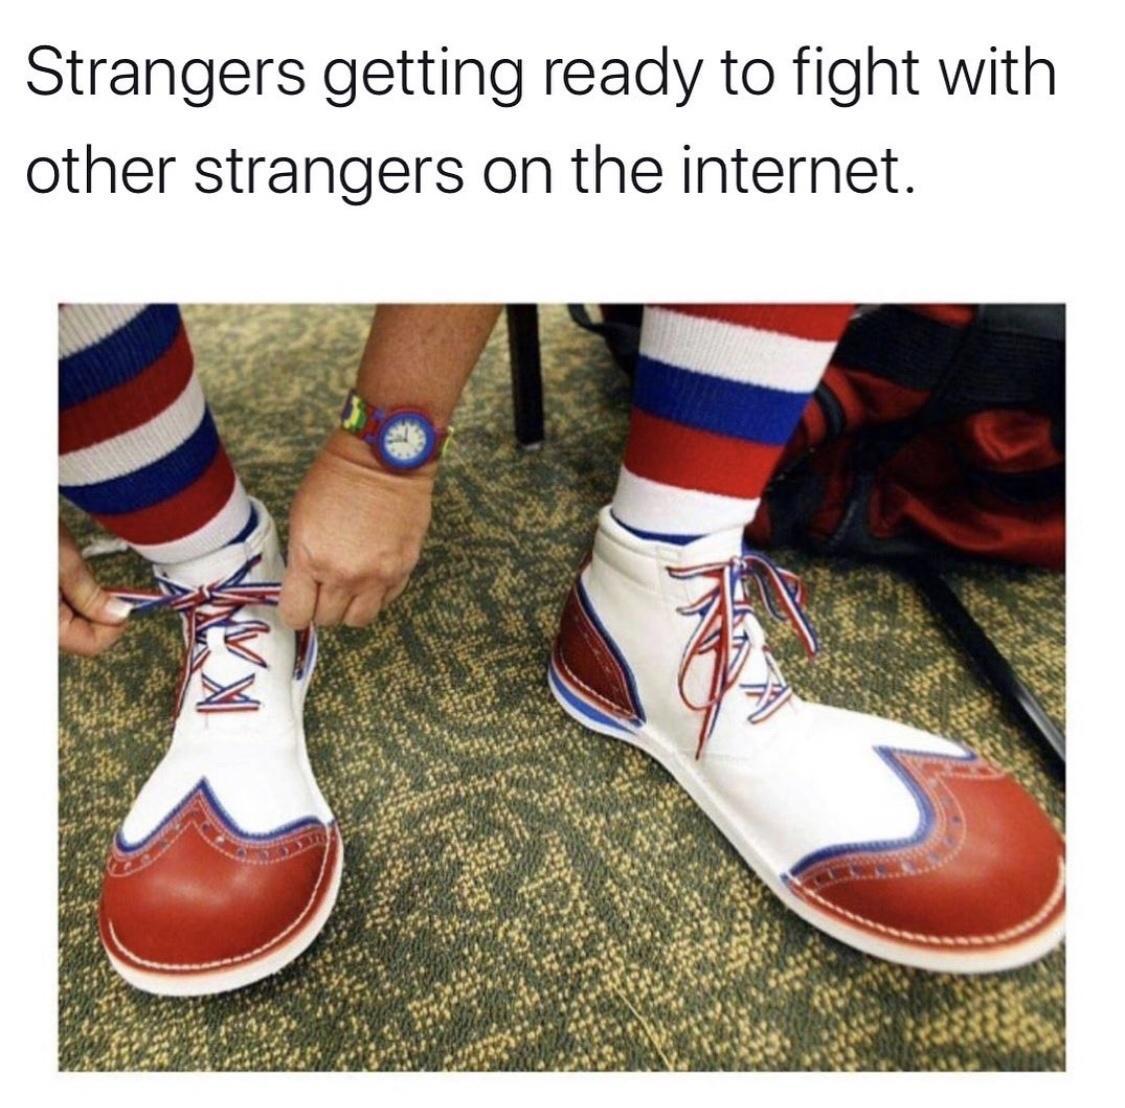 nigel farage shoes - Strangers getting ready to fight with other strangers on the internet.